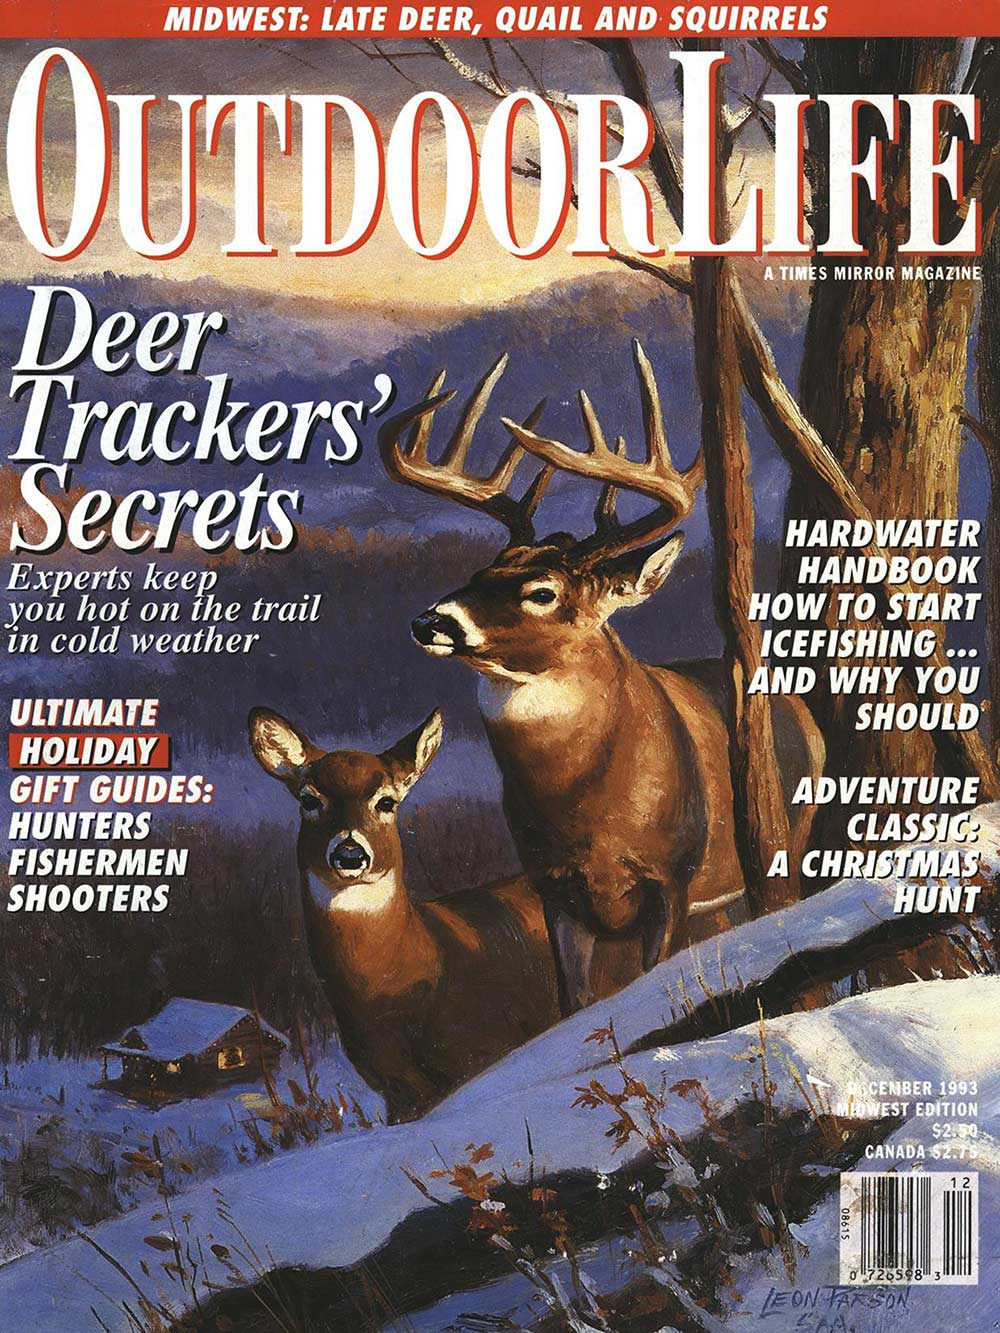 December 1993 Cover of Outdoor Life